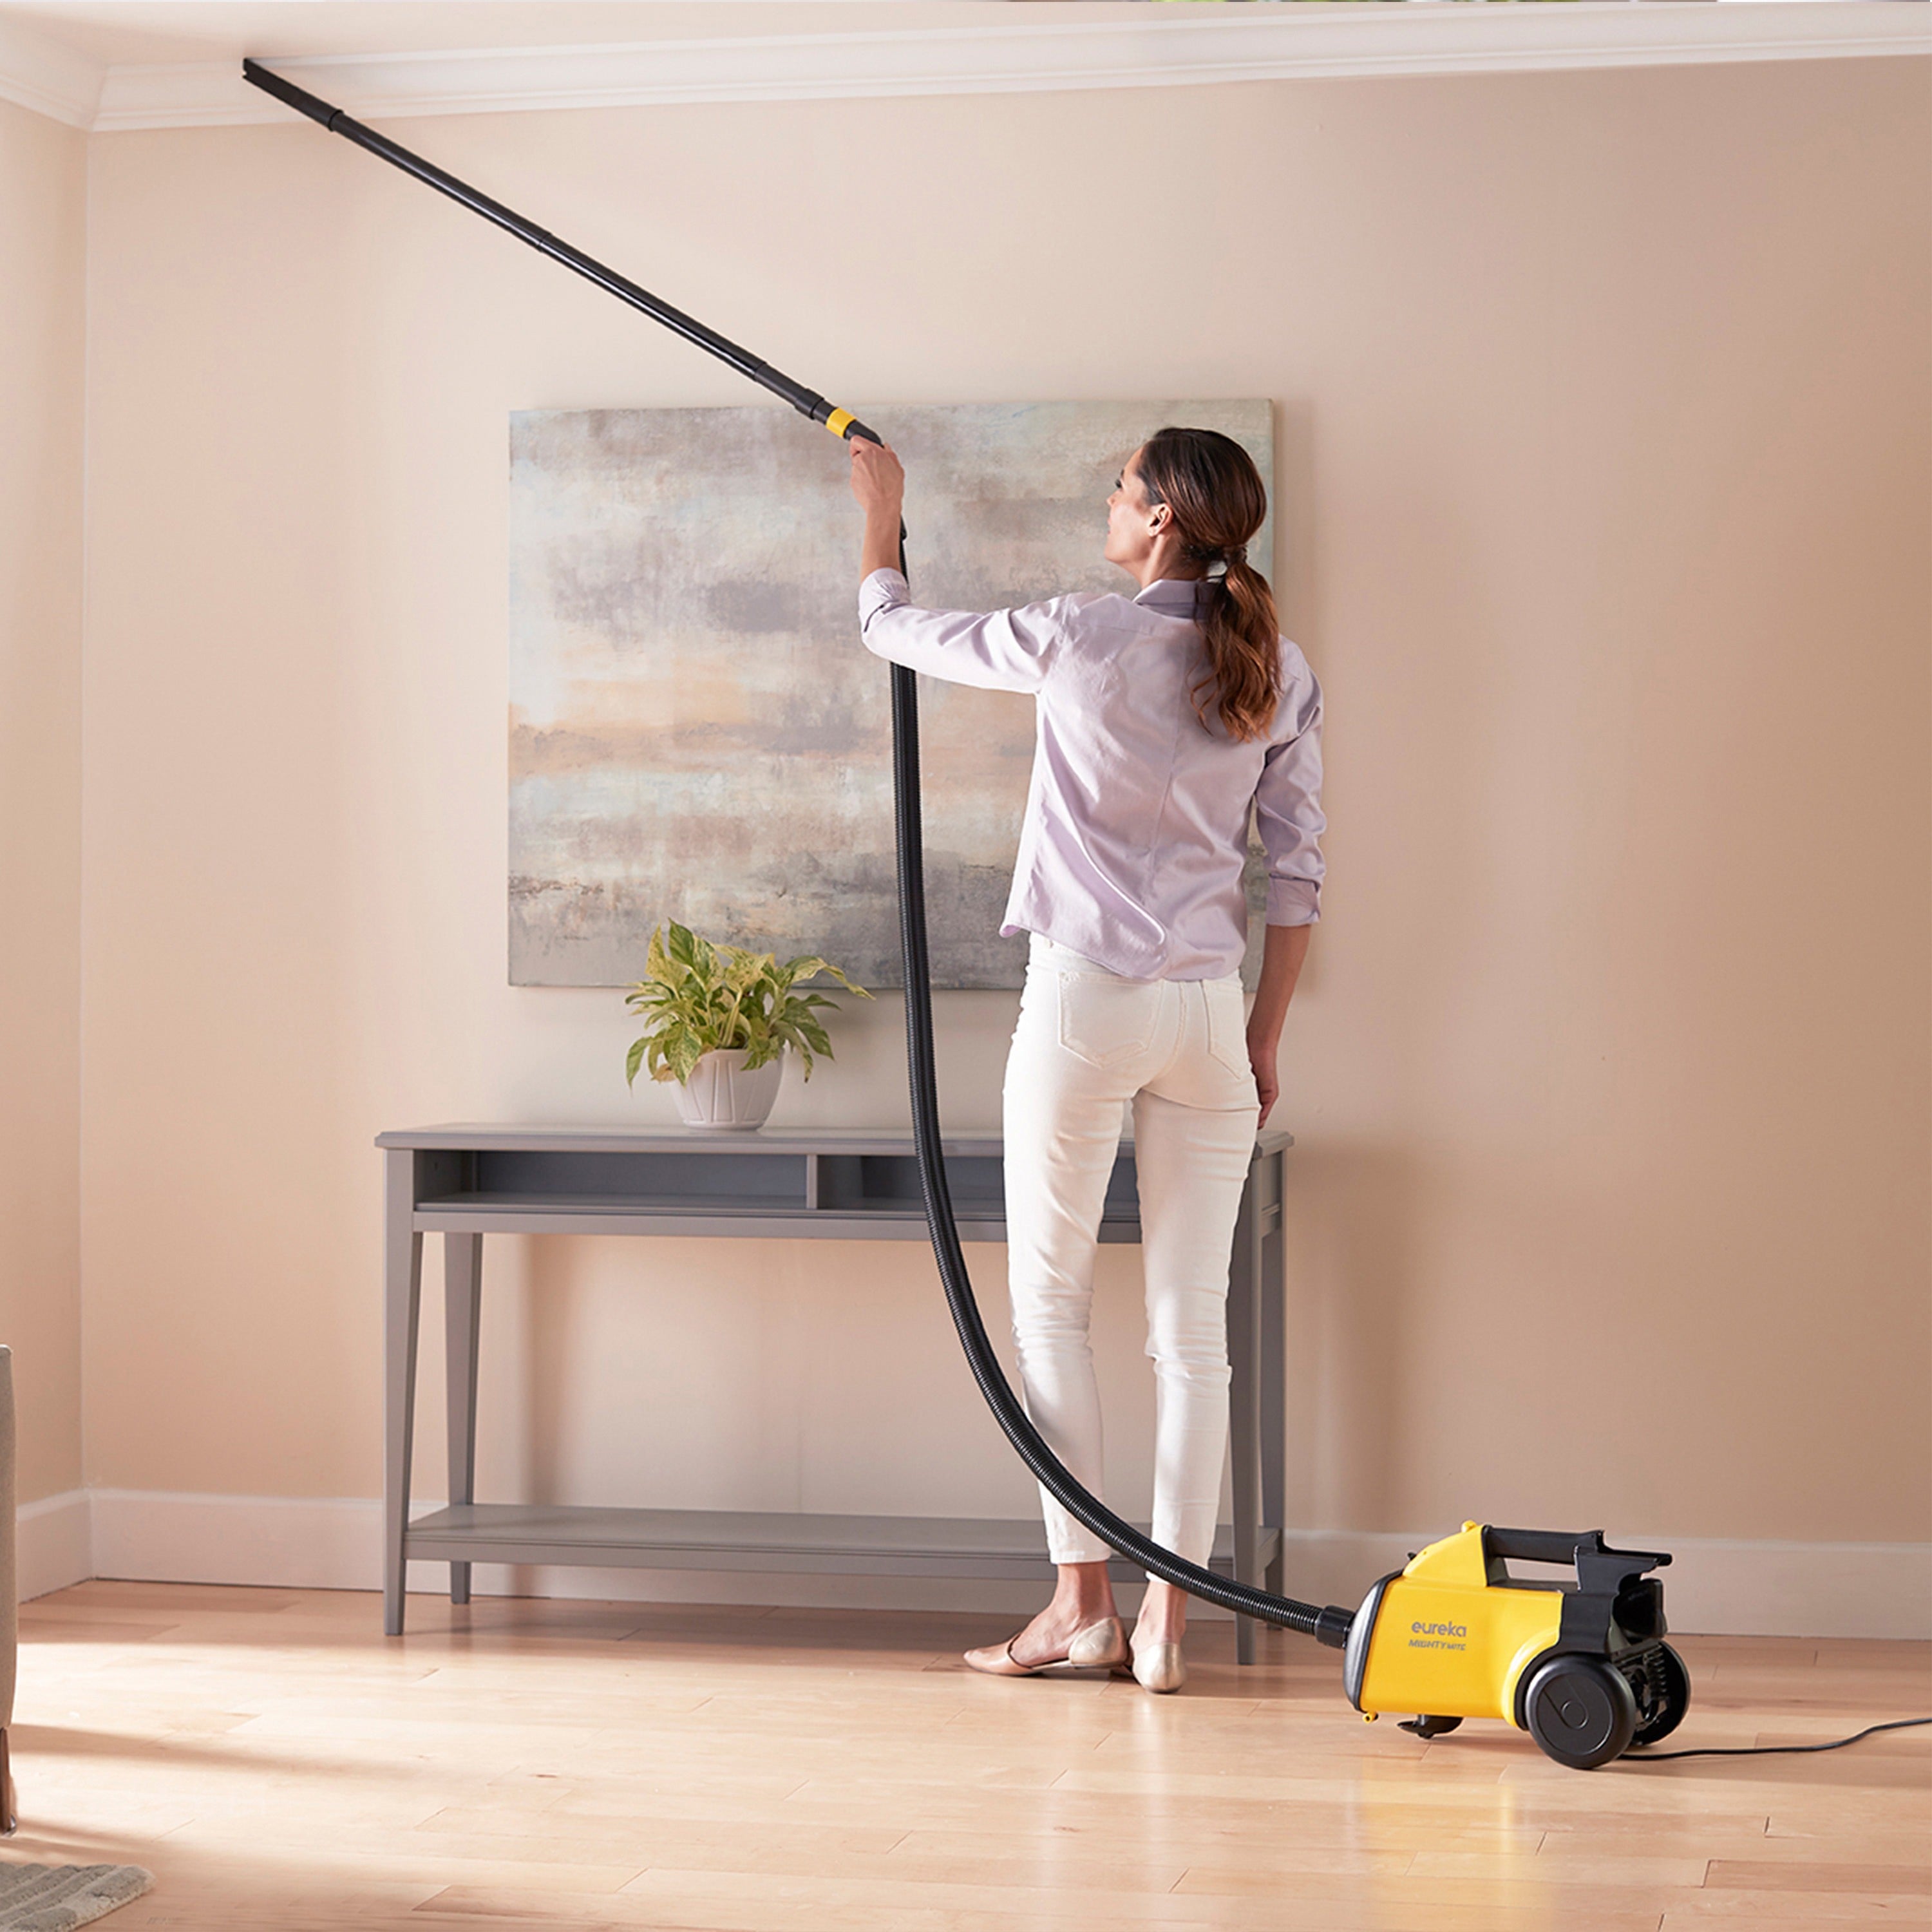 eureka-mighty-mite-3670g-canister-vacuum-cleaner-11-cleaning-width-12-a_nen3670g - 3